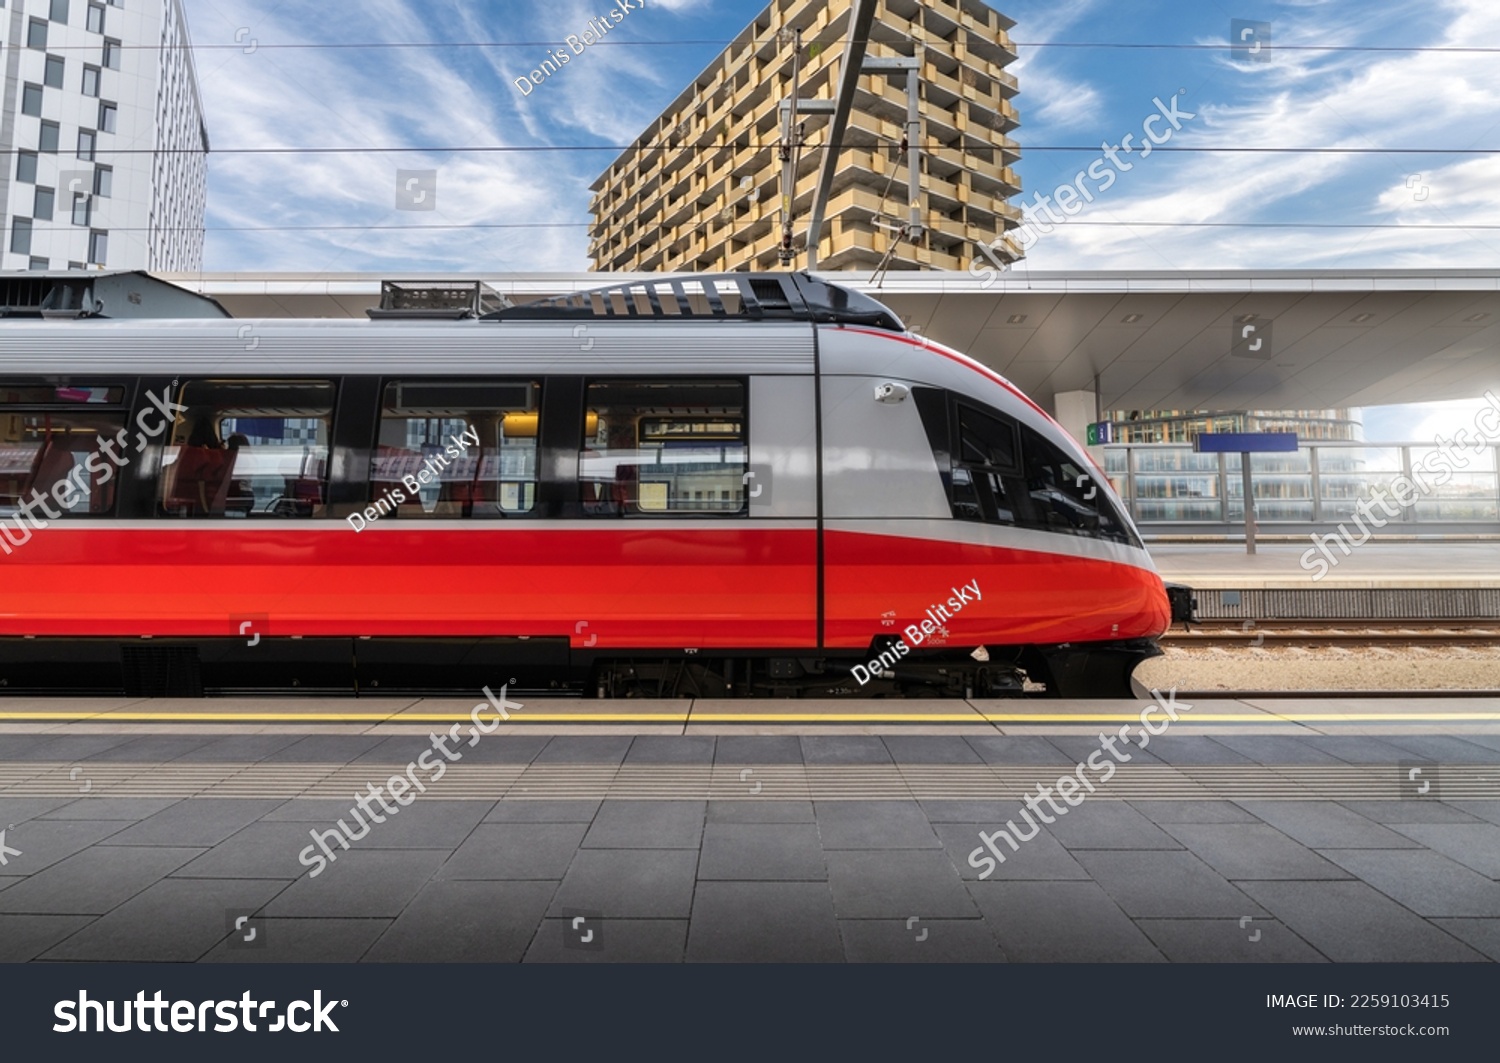 High speed train on the train station at sunset in Vienna, Austria. Beautiful red modern intercity passenger train on the railway platform, buildings. Side view. Railroad. Commercial transportation #2259103415